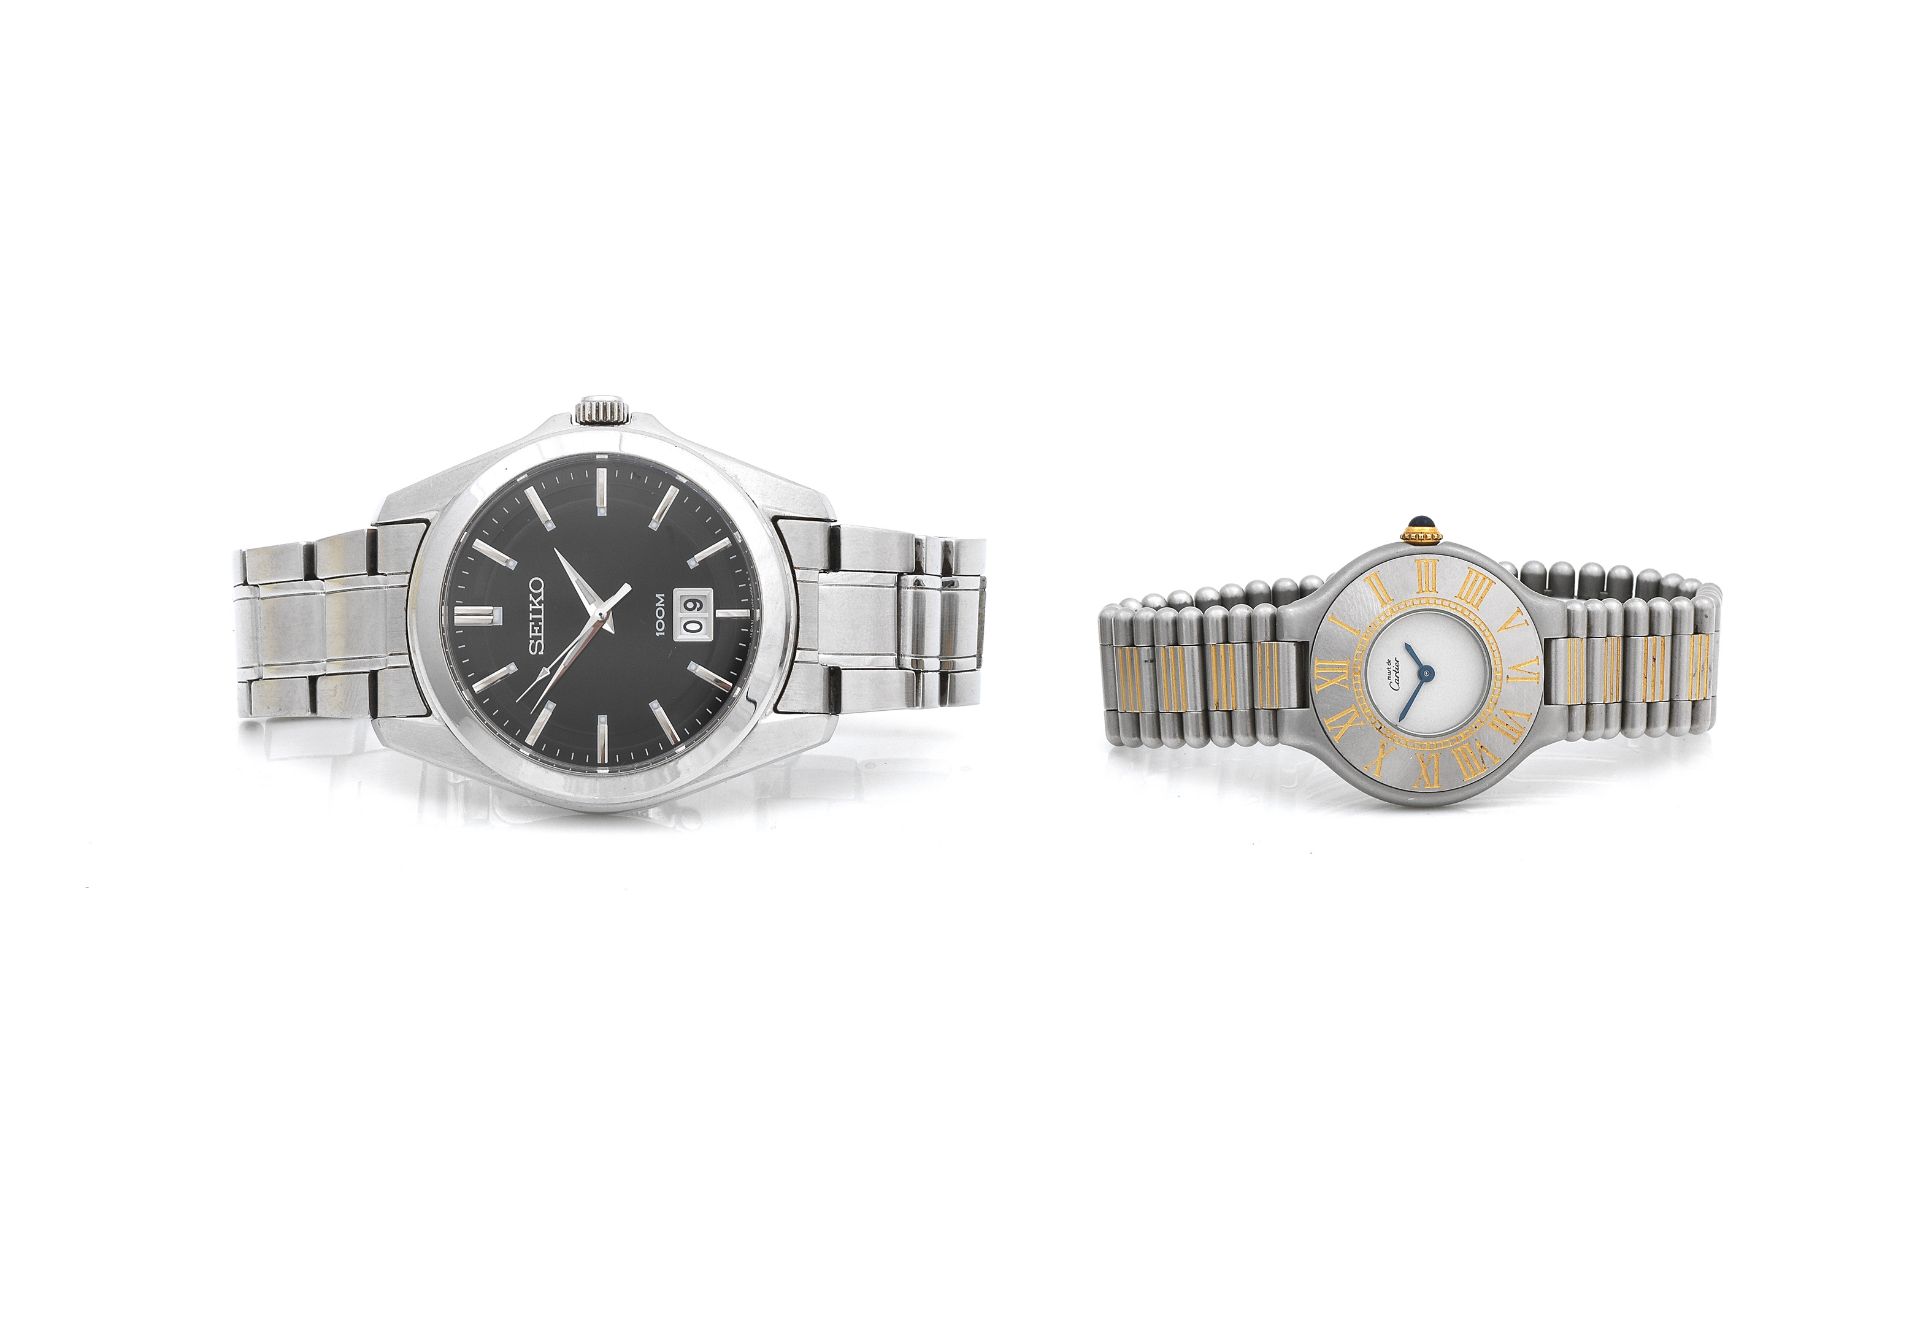 A lady's must de Cartier watch and a gent's Seiko watch